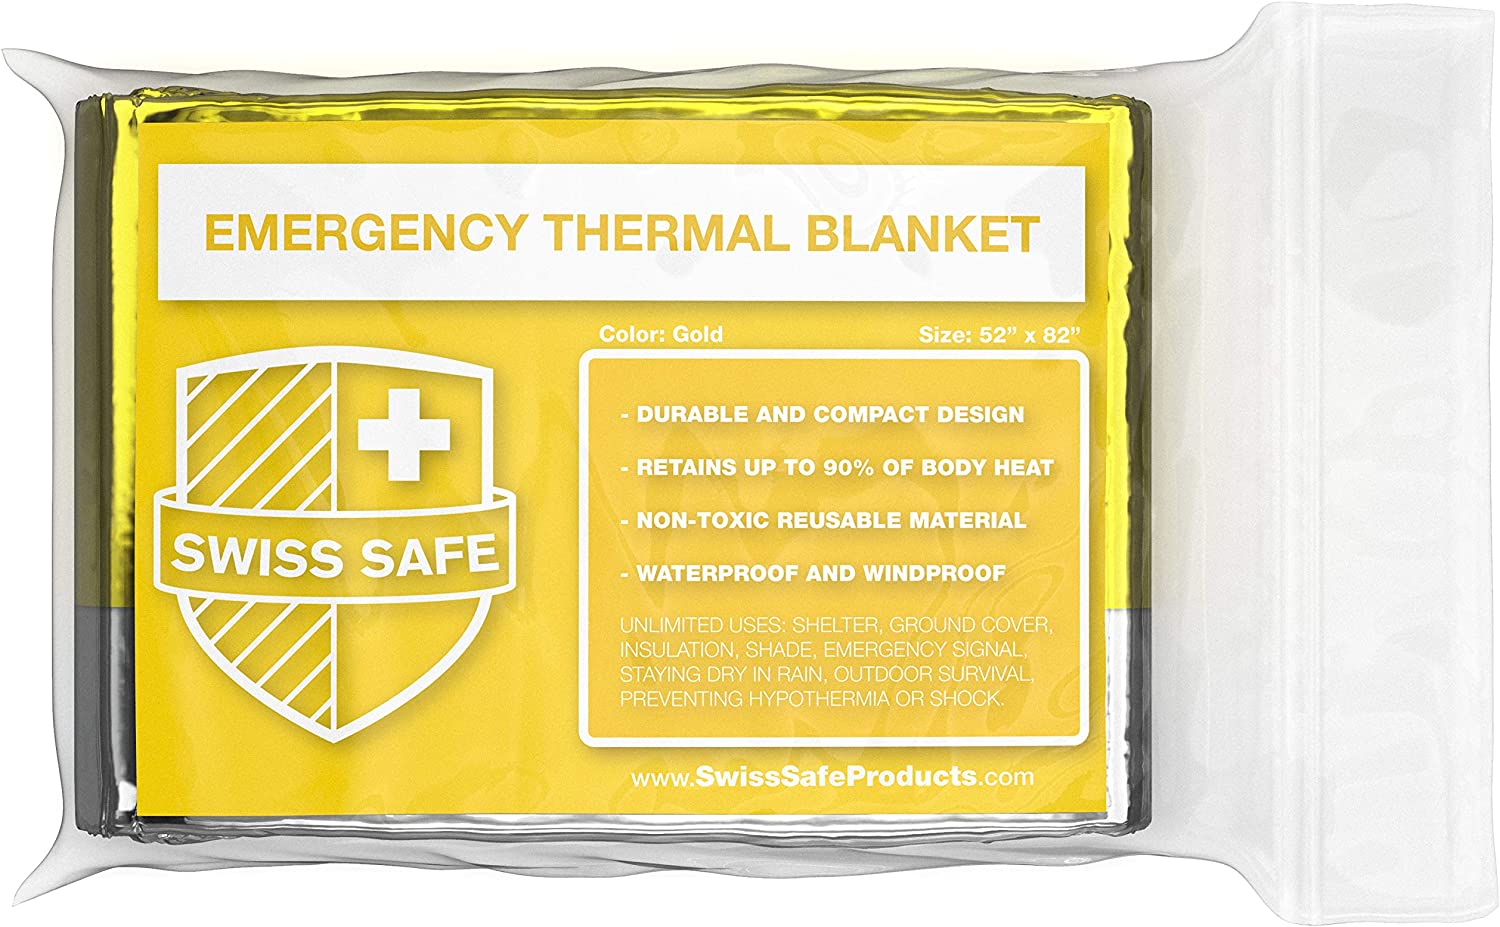 Swiss Safe Gold Emergency Mylar Thermal Survival Blanket: Camping, Outdoors, or Marathons